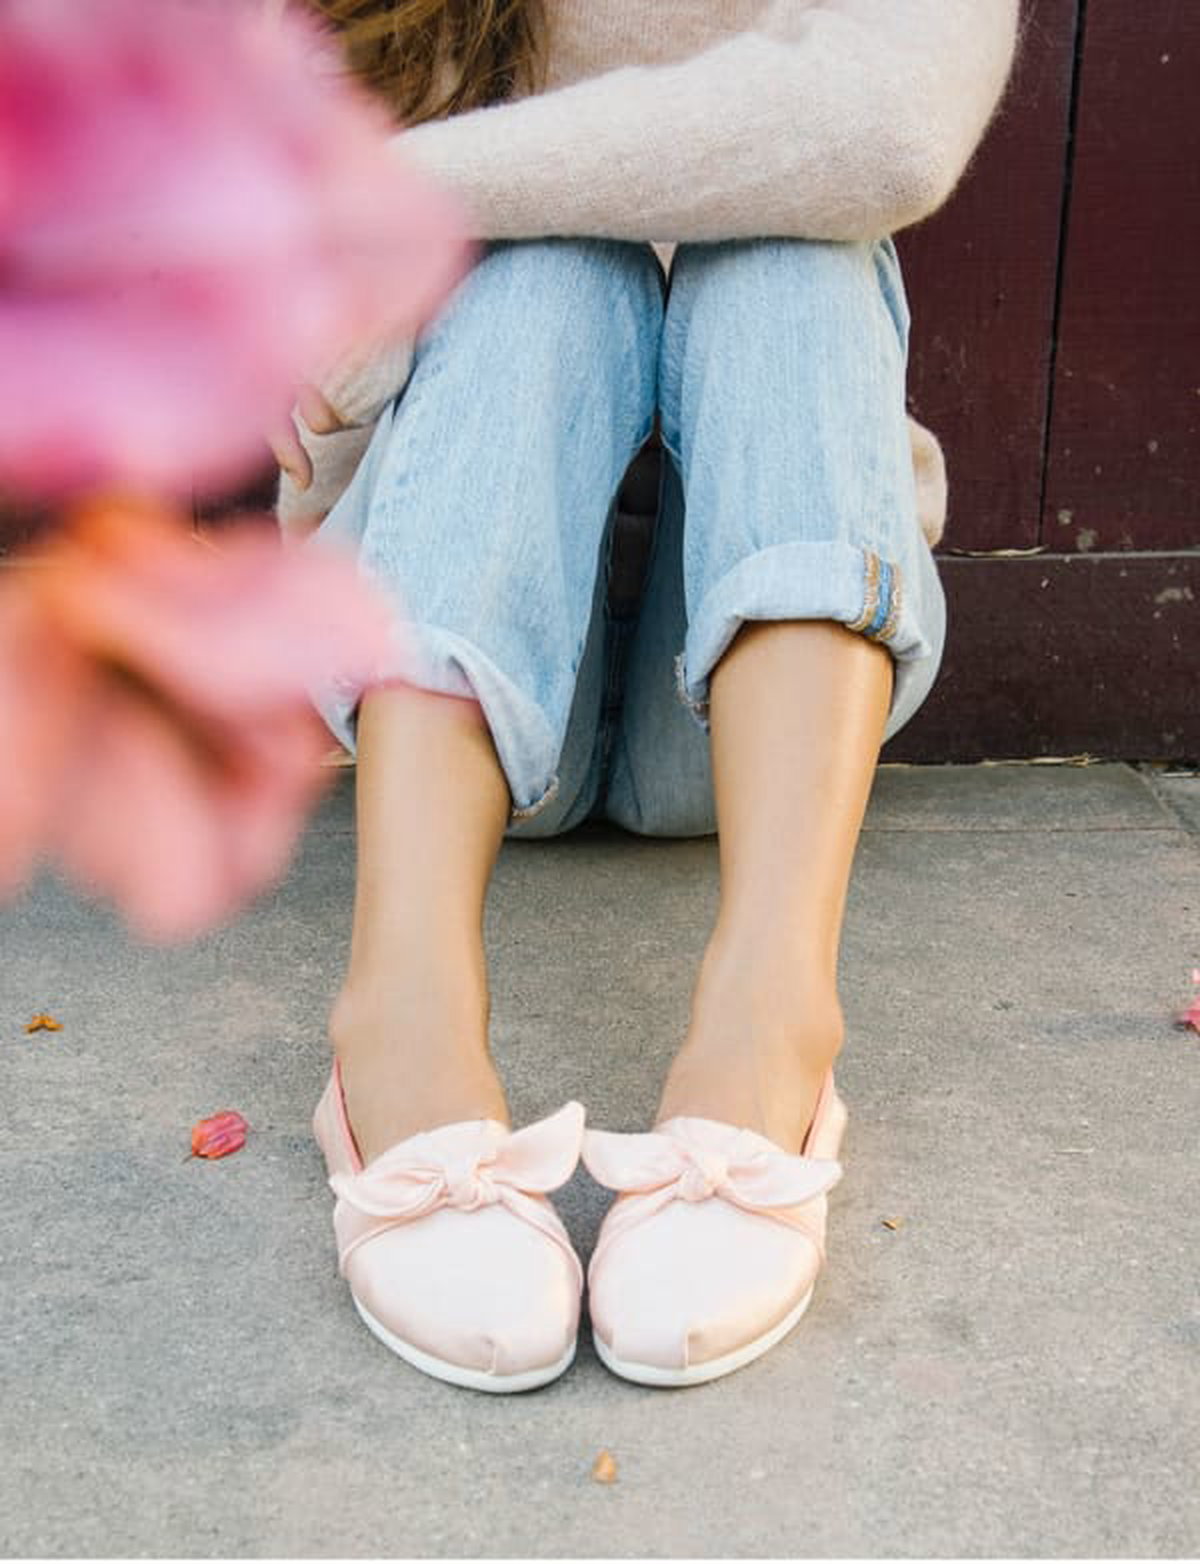 pink toms with bow